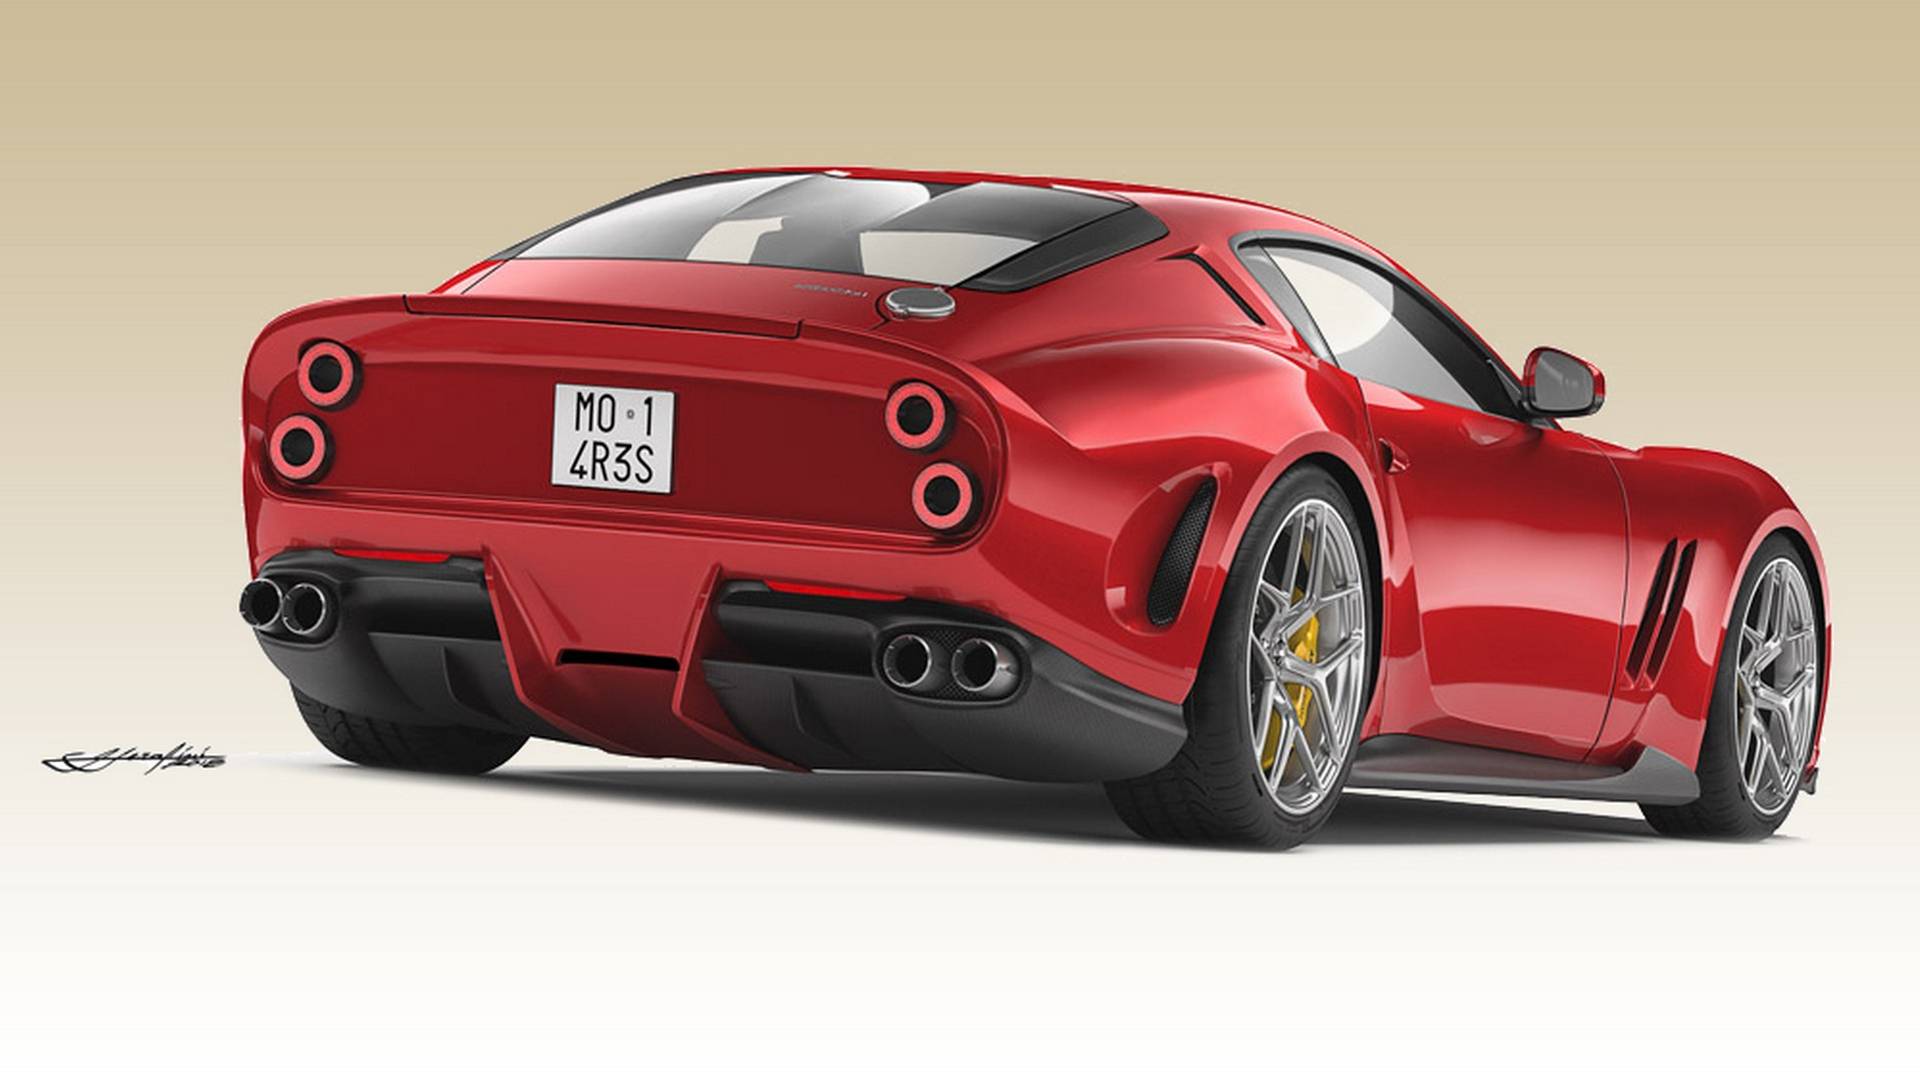 ferrari-loses-trademark-for-the-shape-of-the-250-gto-after-ares-design-contest_5.jpg